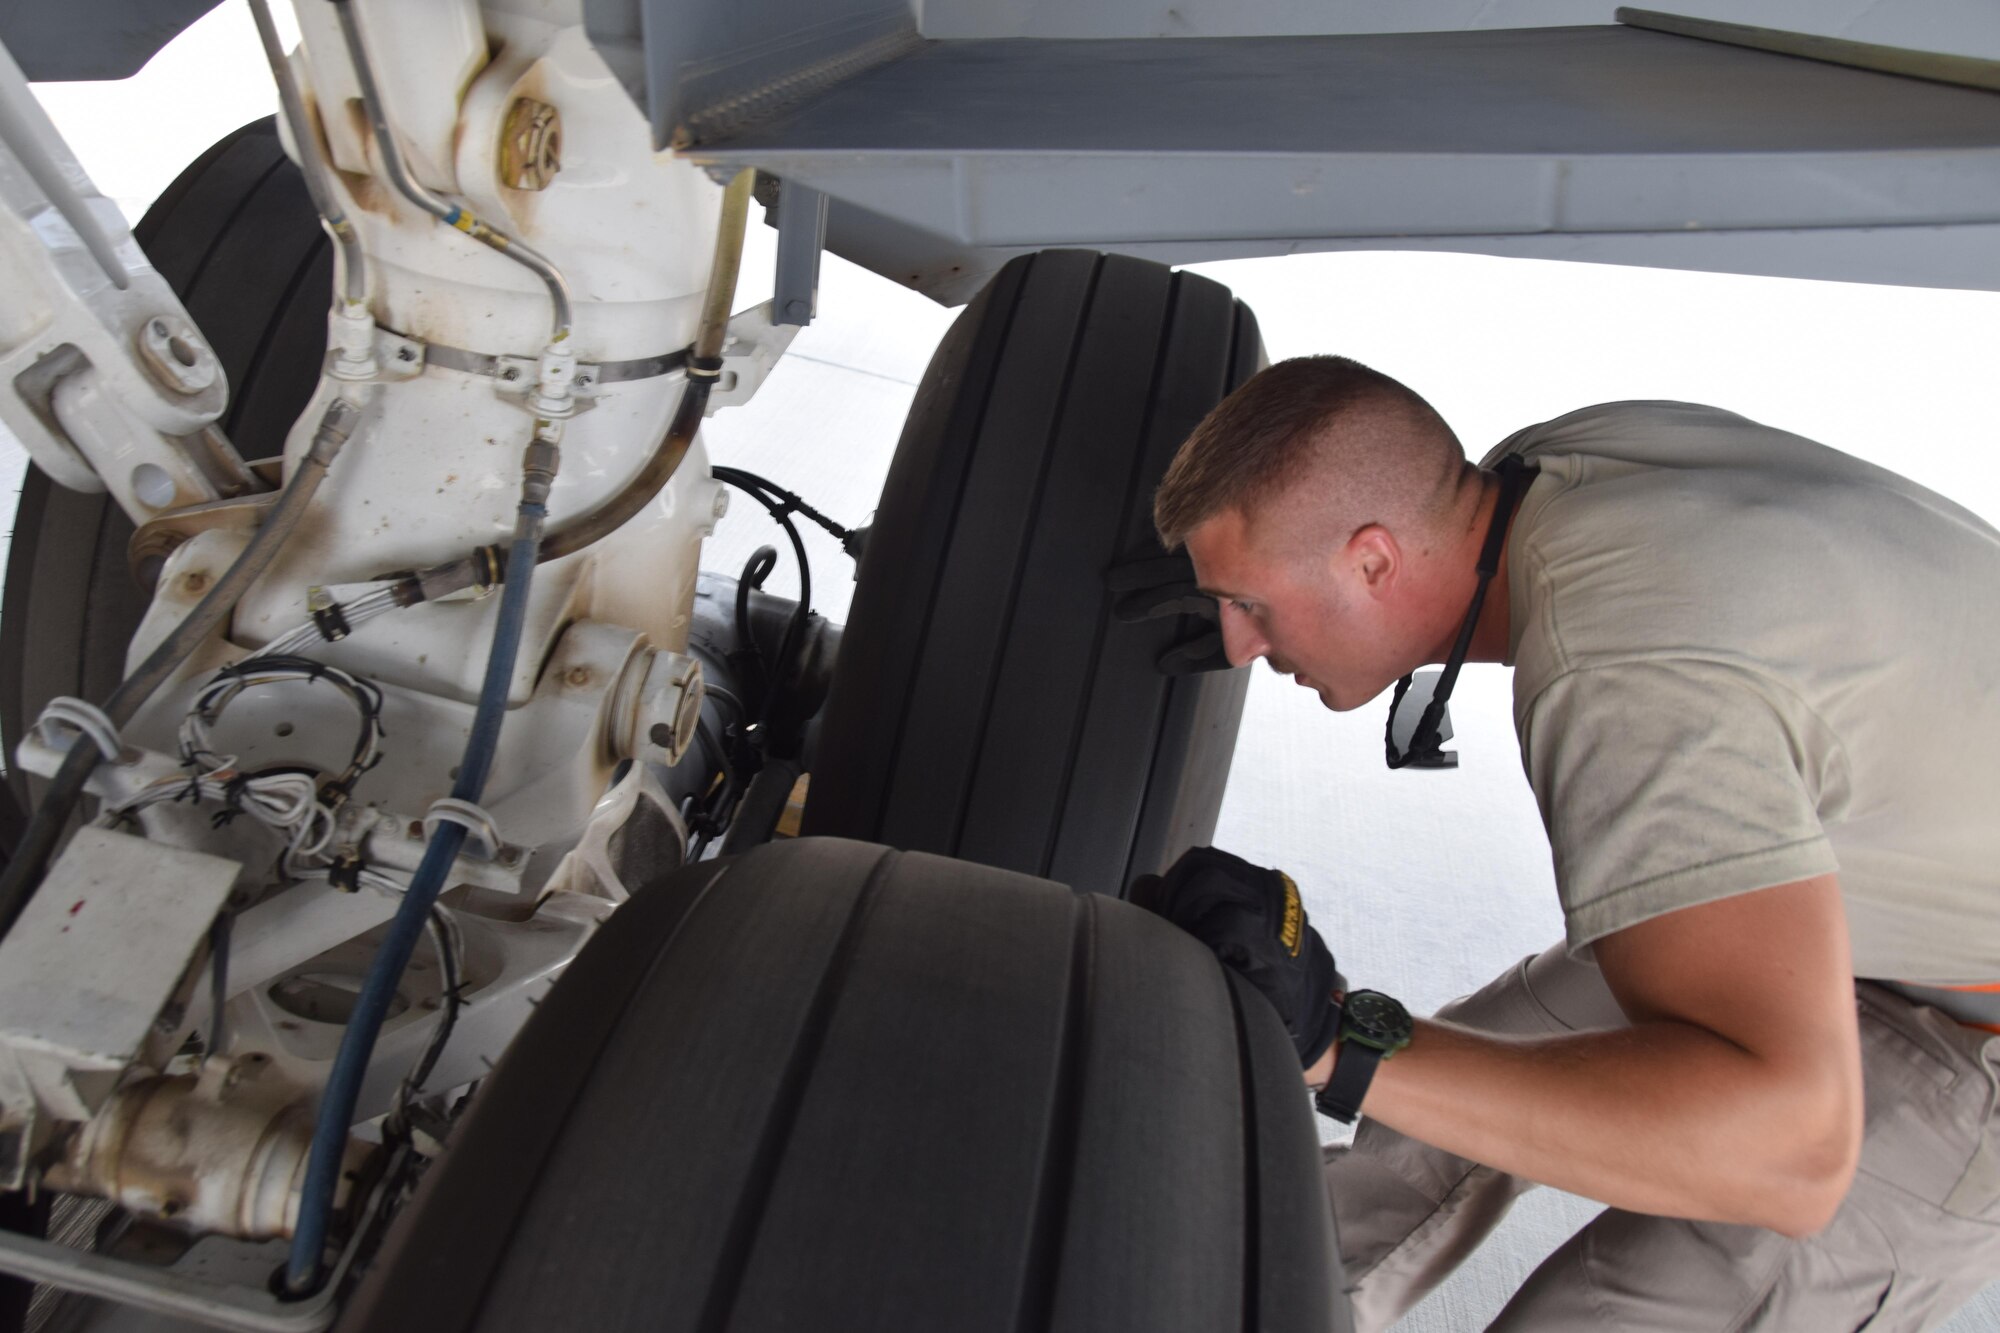 Staff Sgt. Ryan Feeney, 340th Expeditionary Aircraft Maintenance Unit crew chief, inspects the landing gear on a KC-135 Stratotanker prior to a mission June 1, 2016, at Al Udeid Air Base, Qatar. KC-135 maintainers work behind the scenes to enable the success of the air refueling mission across the theater. The 340th AMU here maintains the largest KC-135 fleet in the world, launching more than 30 KC-135s daily in support of Operation Inherent Resolve and other theater requirements. Feeney is attached to the 379th Air Expeditionary Wing and hails from Bangor Air National Guard Base, Maine. (U.S. Air Force photo by Technical Sgt. Carlos J. Trevino/Released)